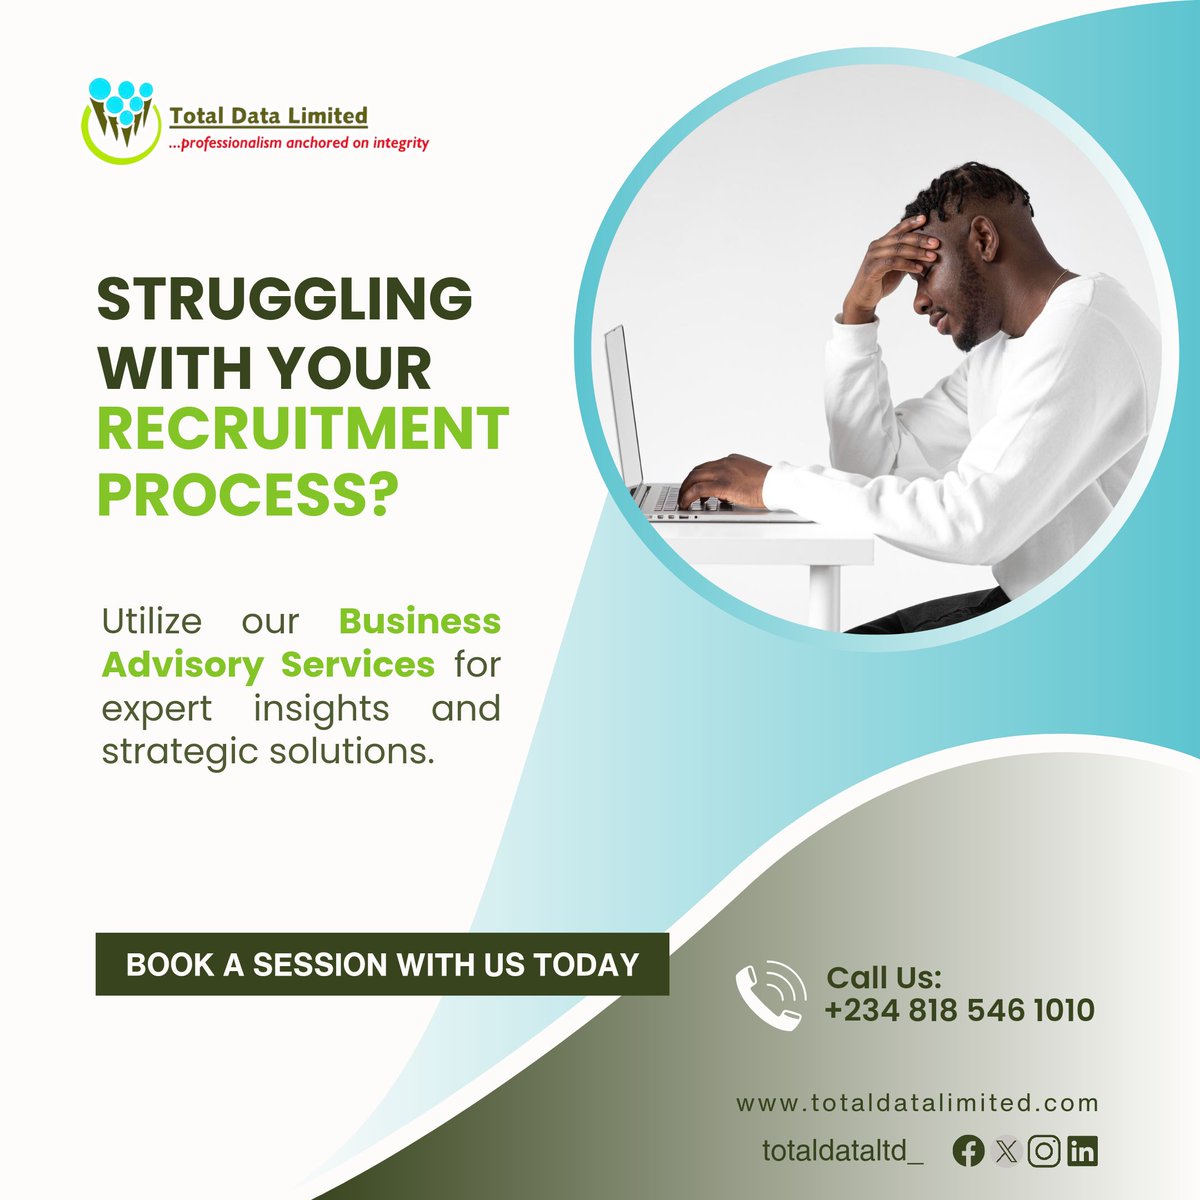 Don't struggle with you HR Management.
Seek professional advice.

Book a session with us today!

#businessadvisory 
#totaldatalimited #TDL360 #OURTDL 
#recruitment #Outsourcing #HRServices